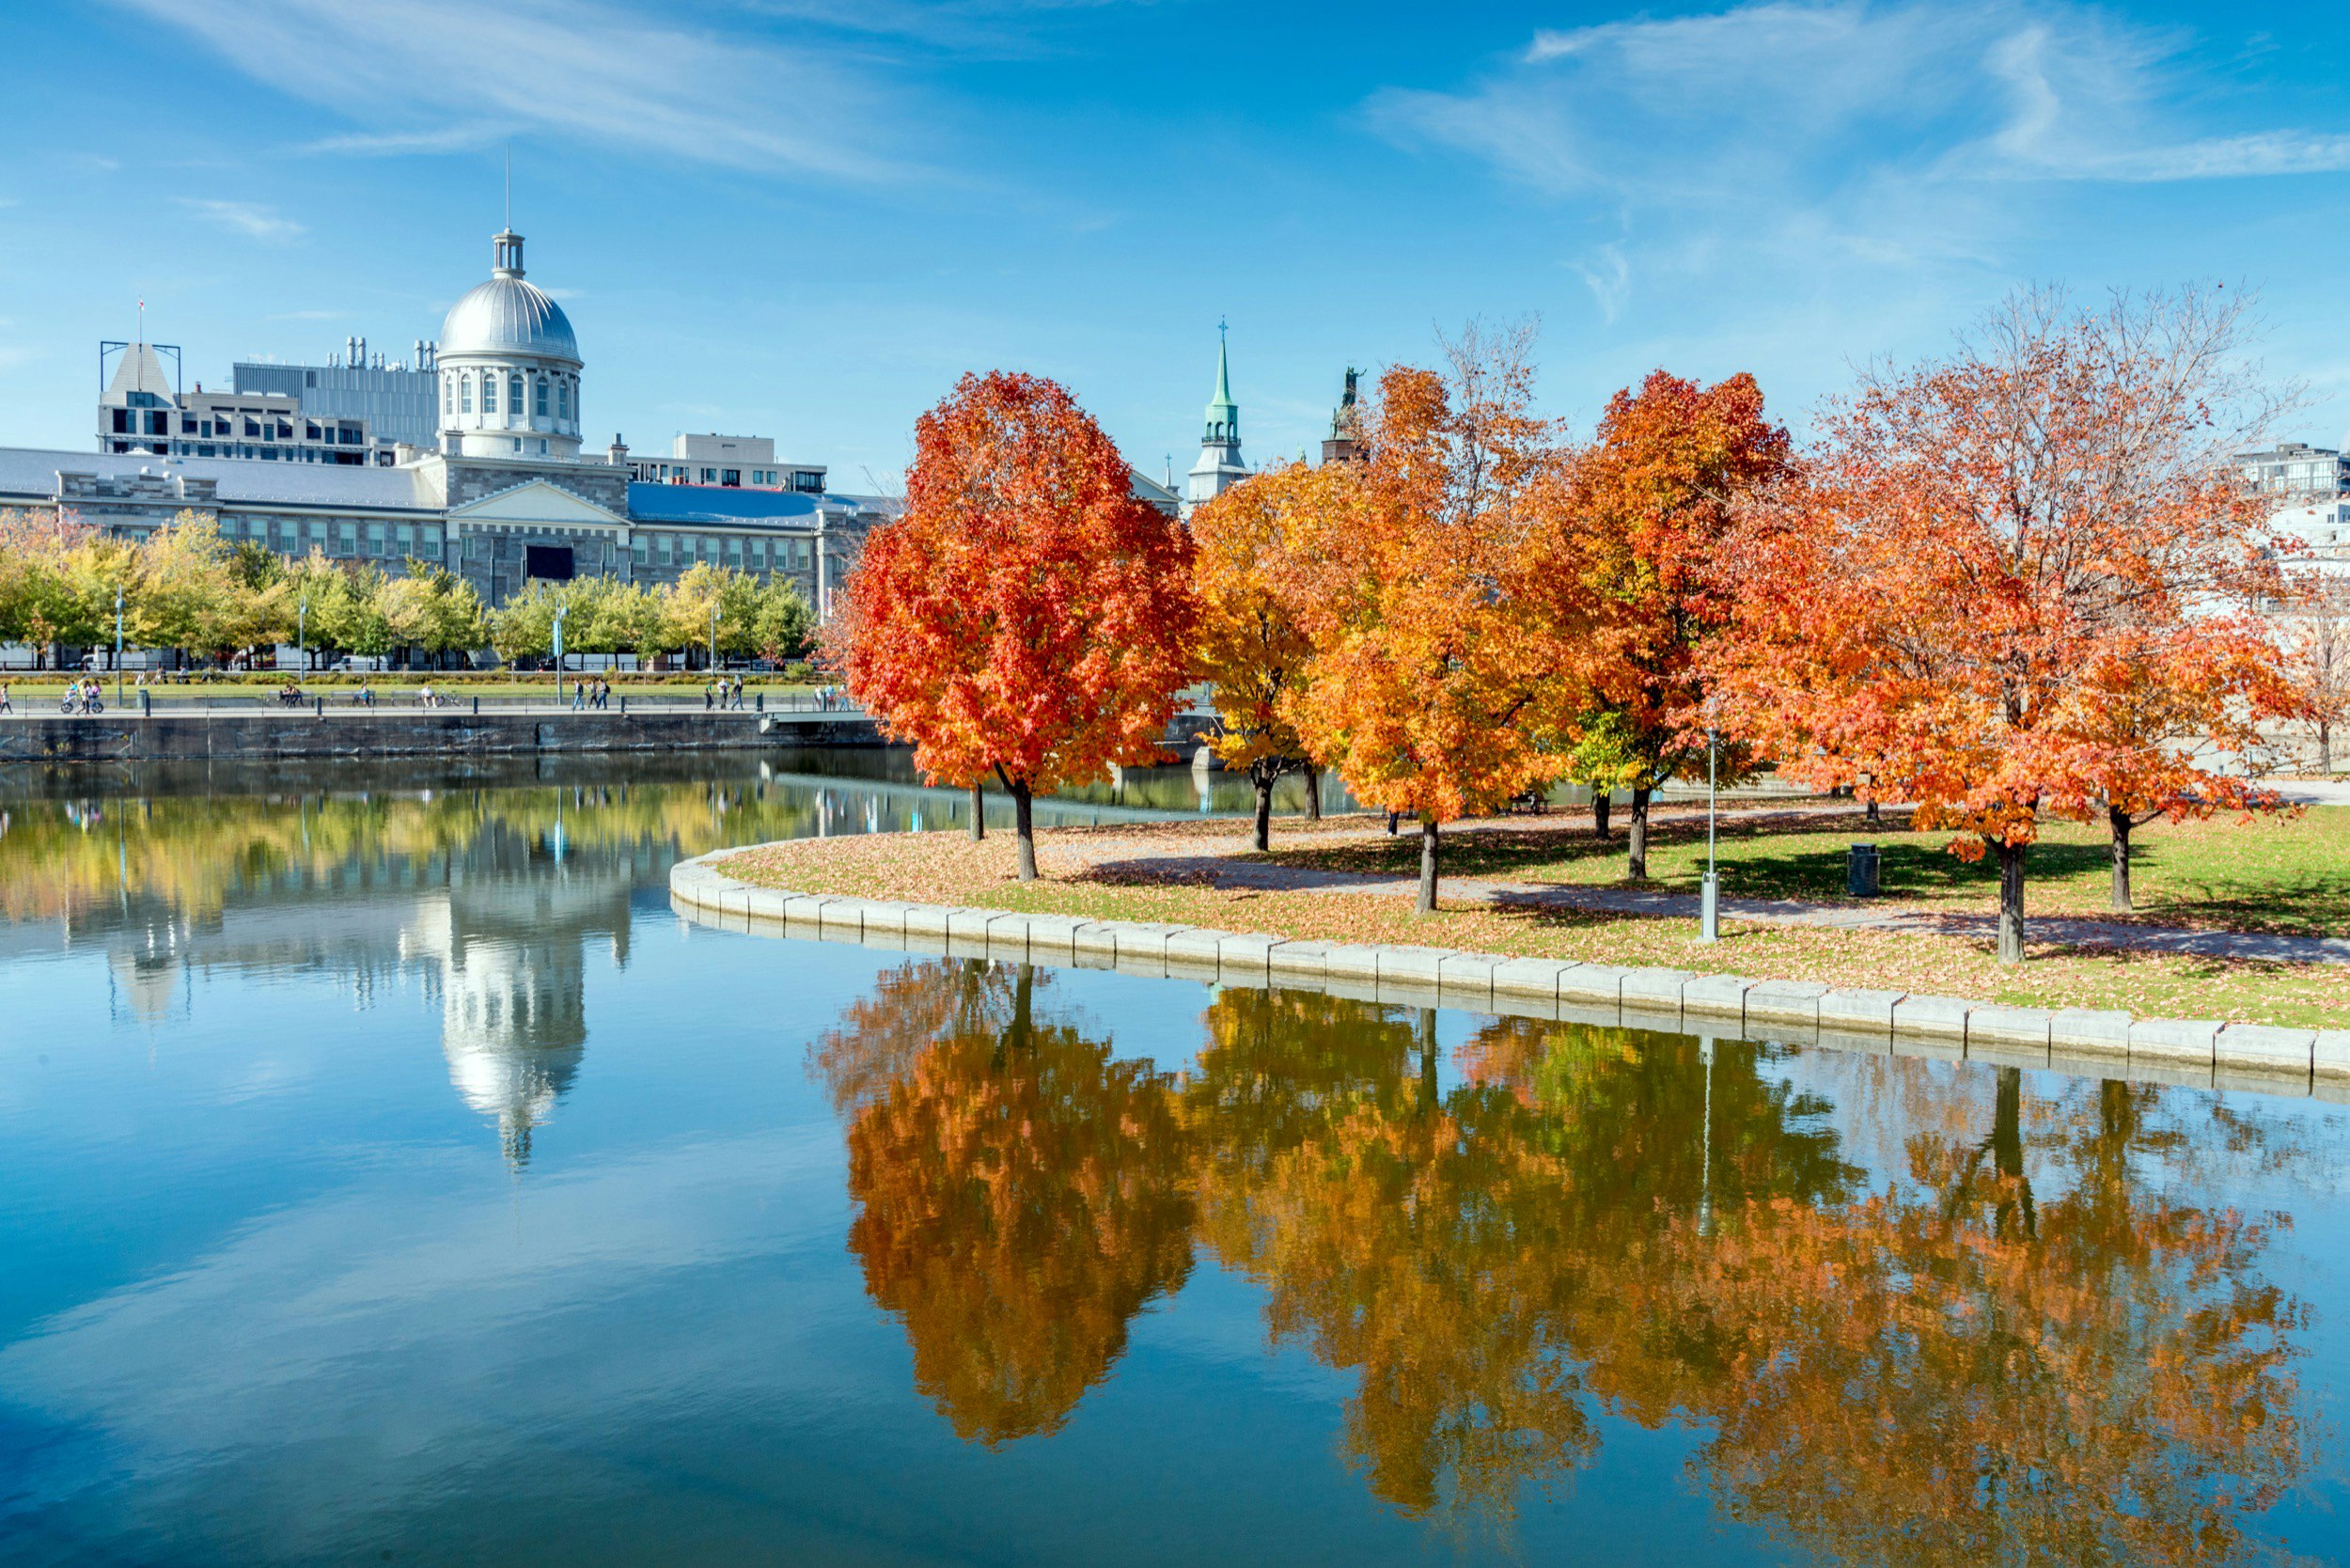 Autumn leaves of red, orange and yellow are reflected in a canal in Montreal, as well as the iconic dome of the market; Fall in Montreal